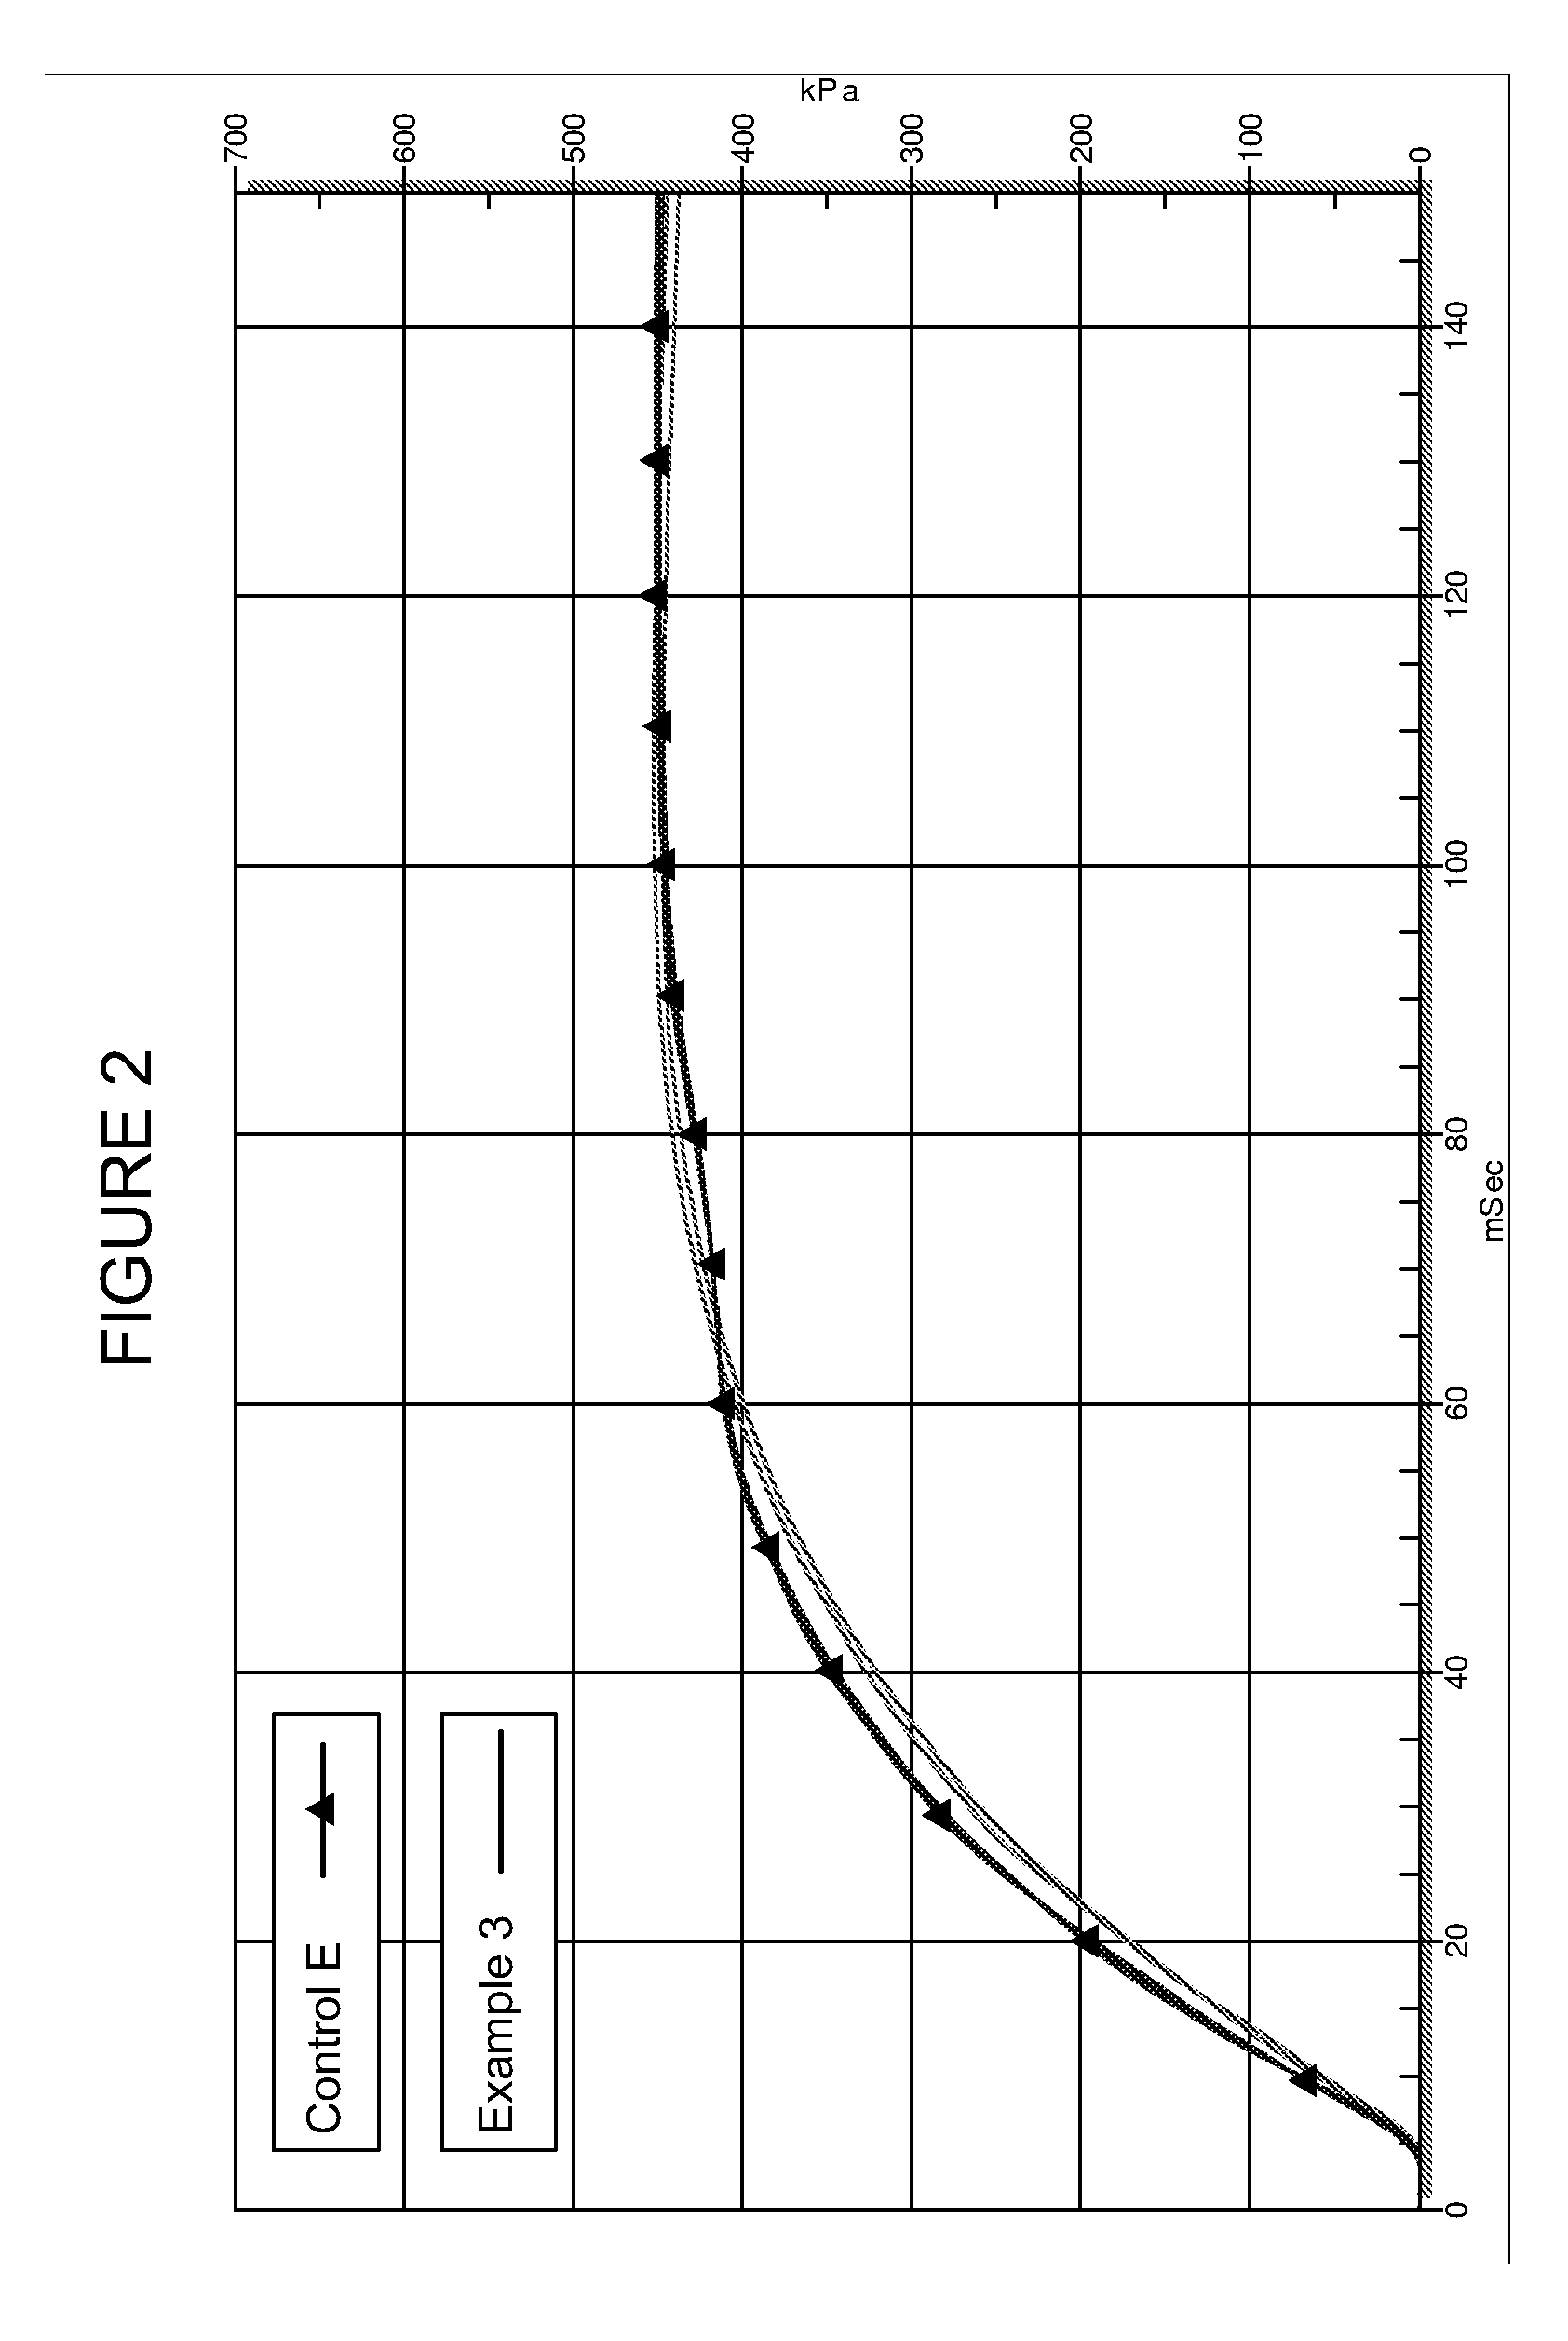 Gas generating compositions having glass fibers